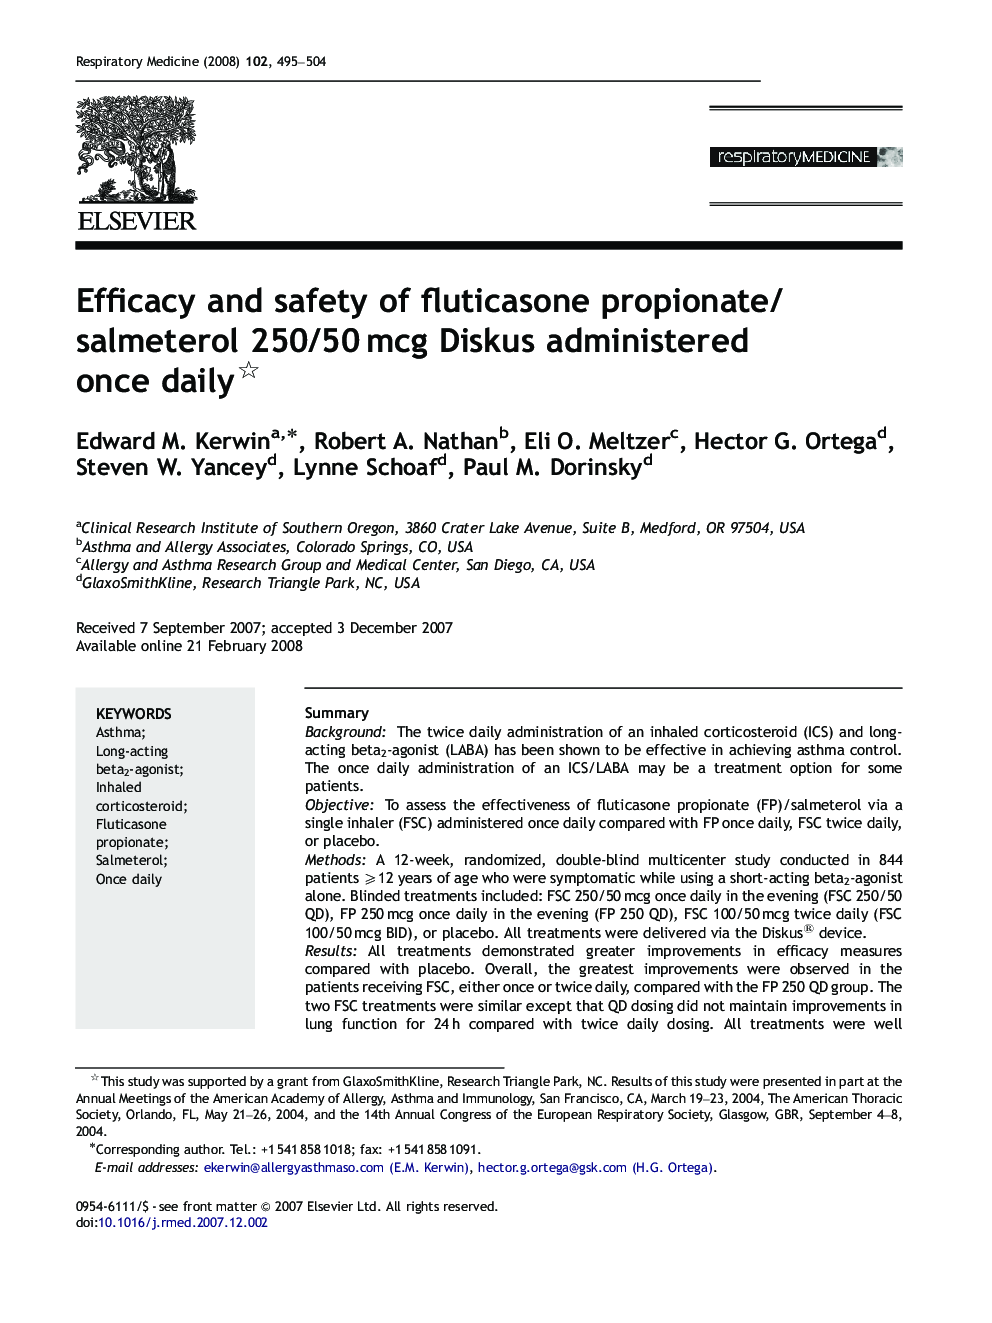 Efficacy and safety of fluticasone propionate/salmeterol 250/50 mcg Diskus administered once daily 